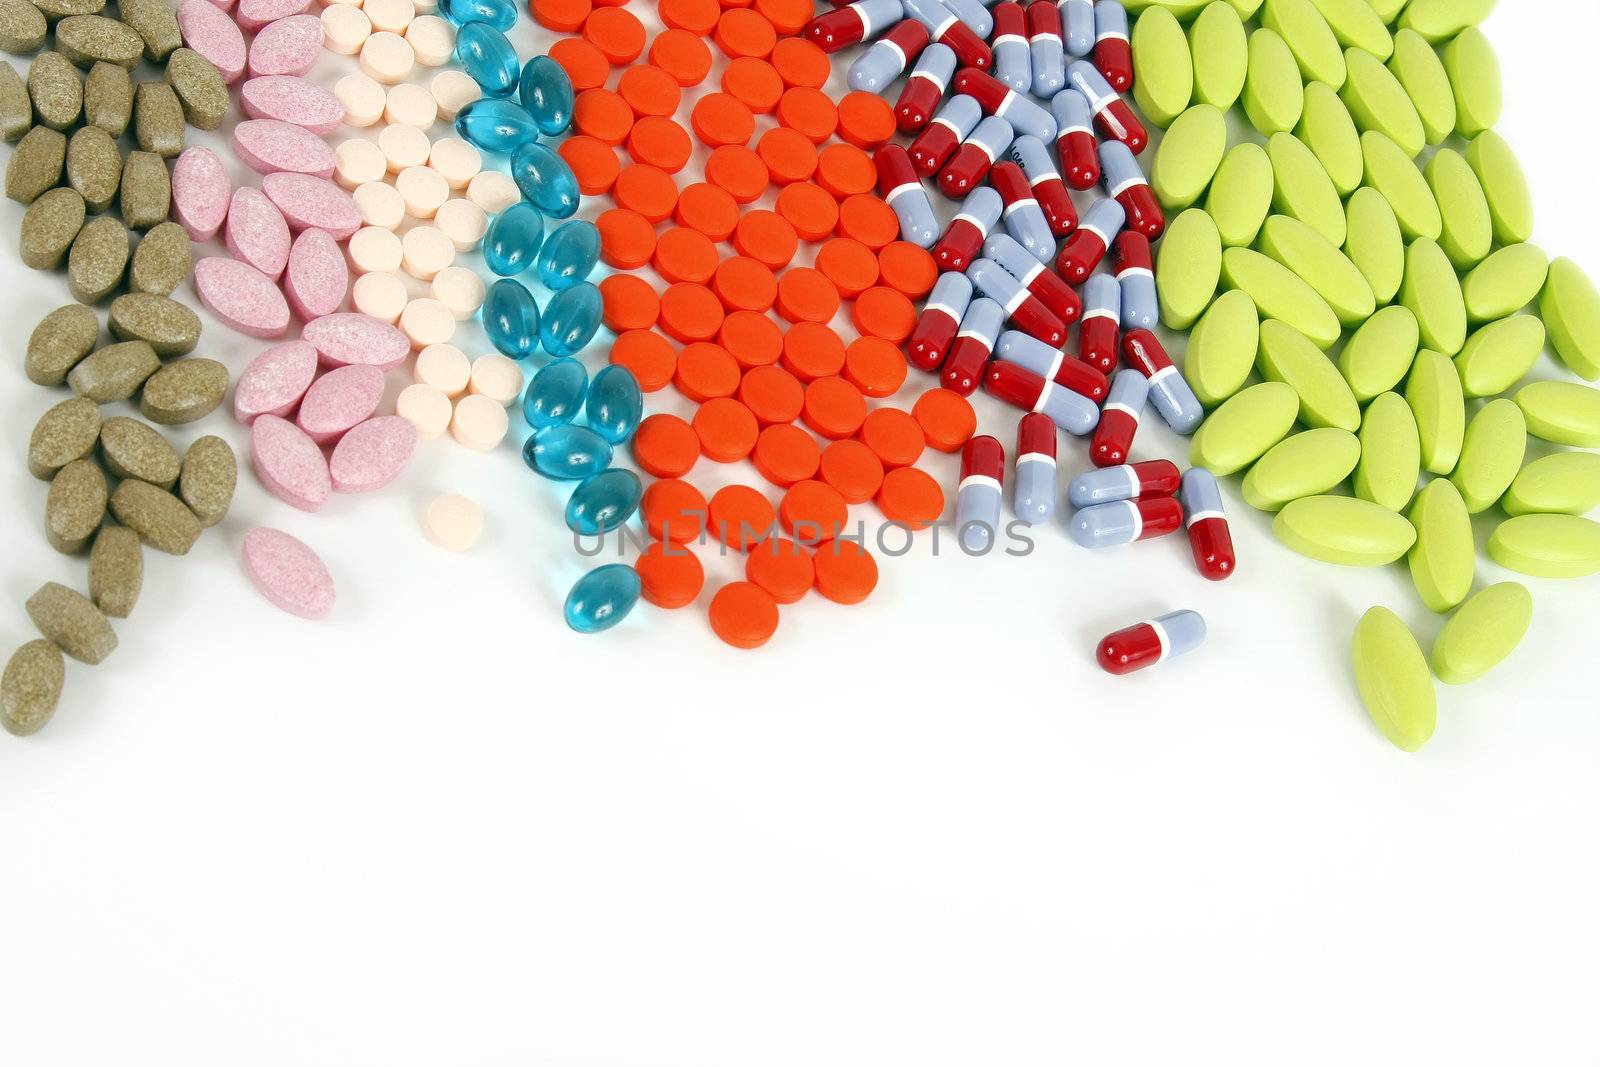 Colorful Pills by pinkarmy25